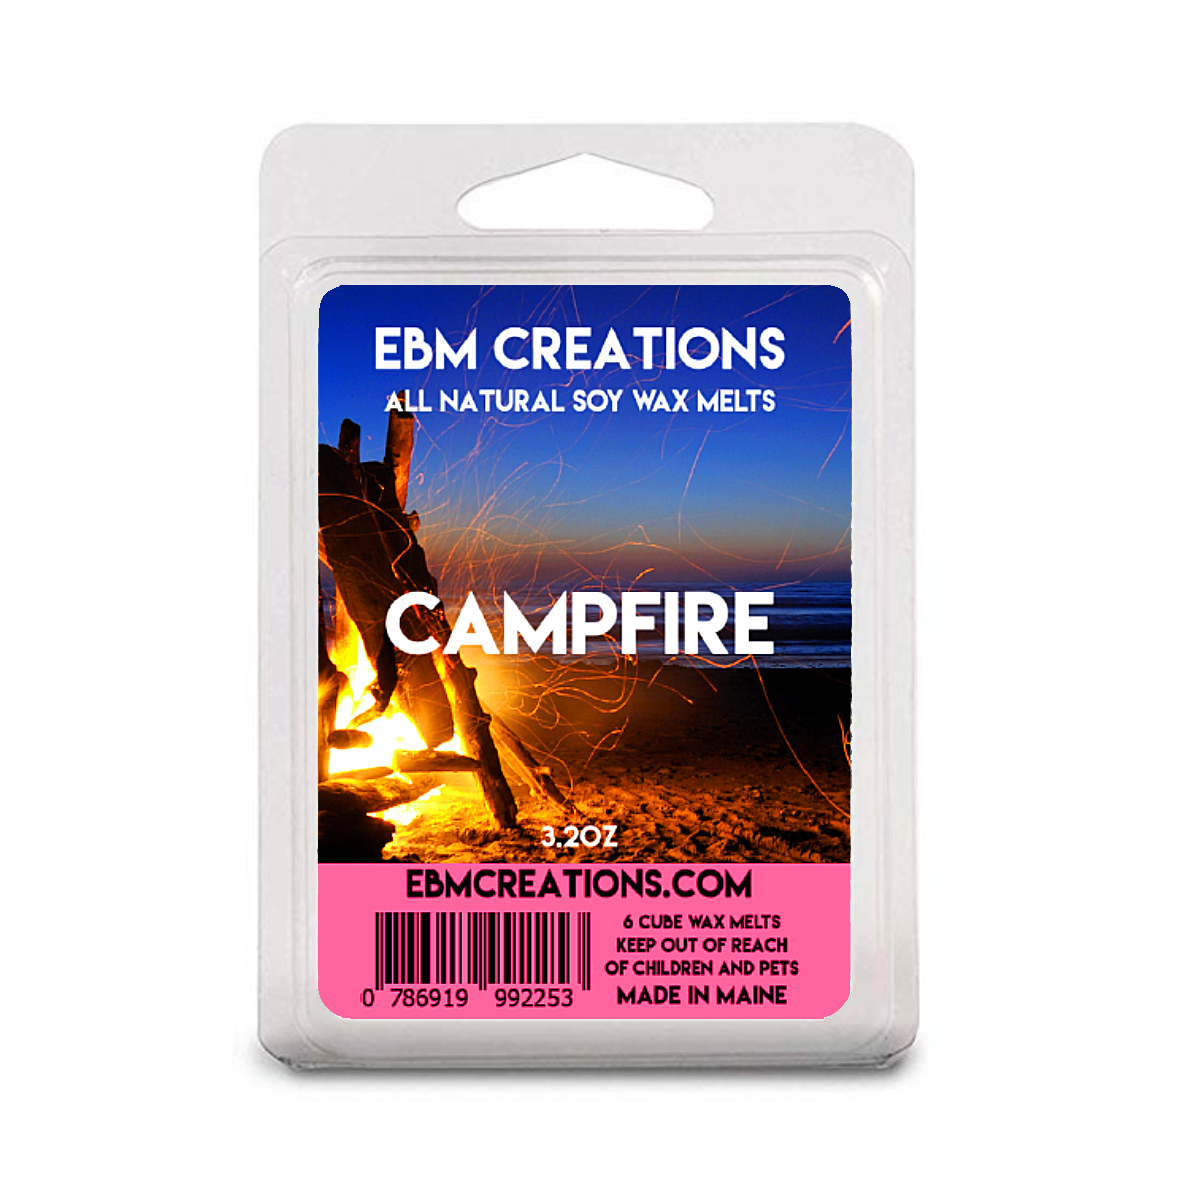 Campfire - 3.2 oz Clamshell